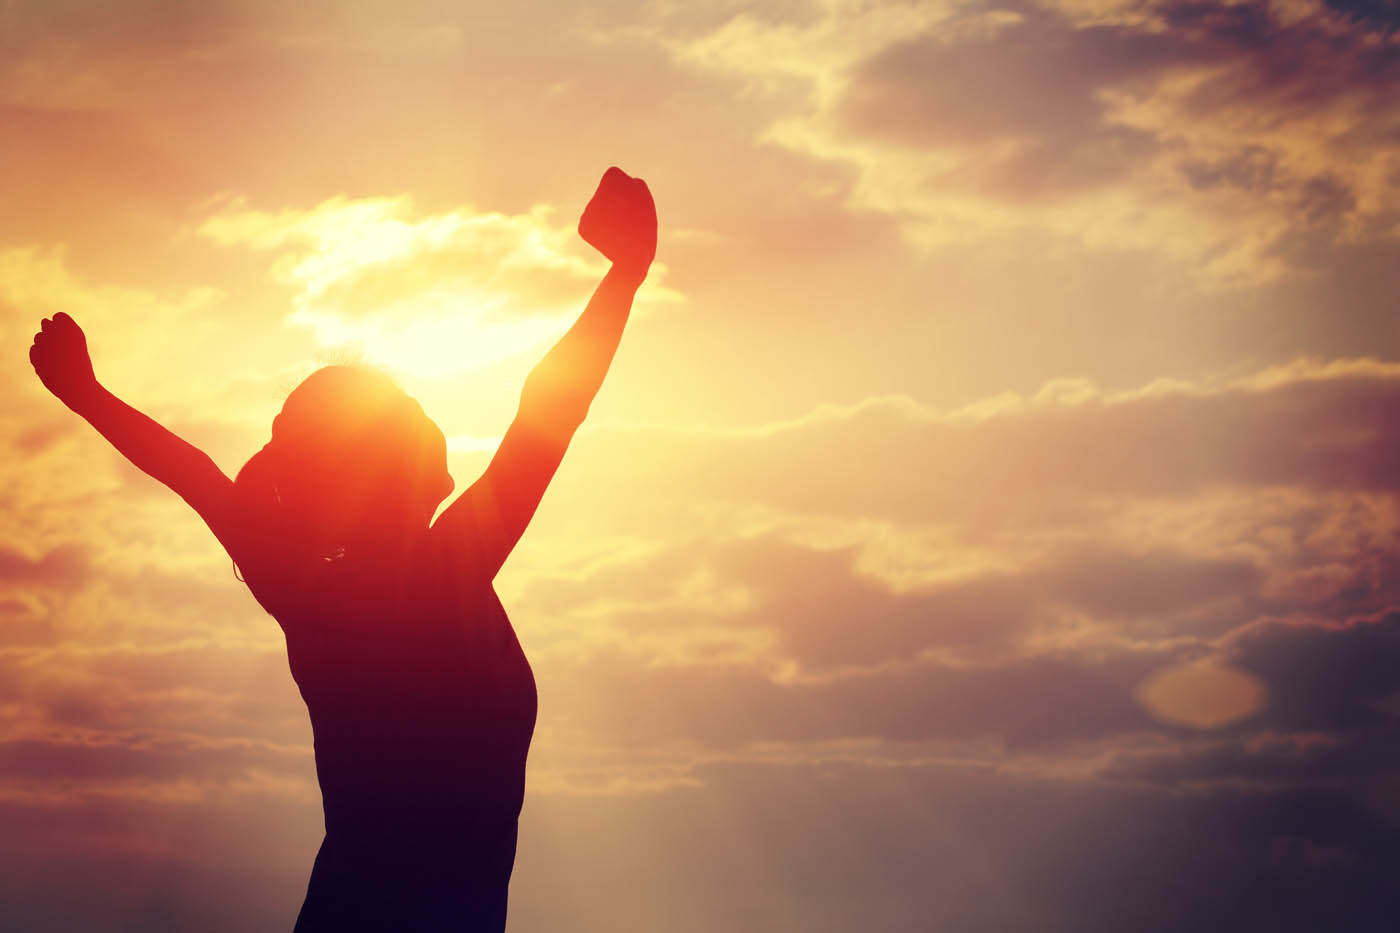 A woman standing in the light with her arms up in the air - learn how you can get relief with Light Lounge's back pain management in Scottsdale, AZ.